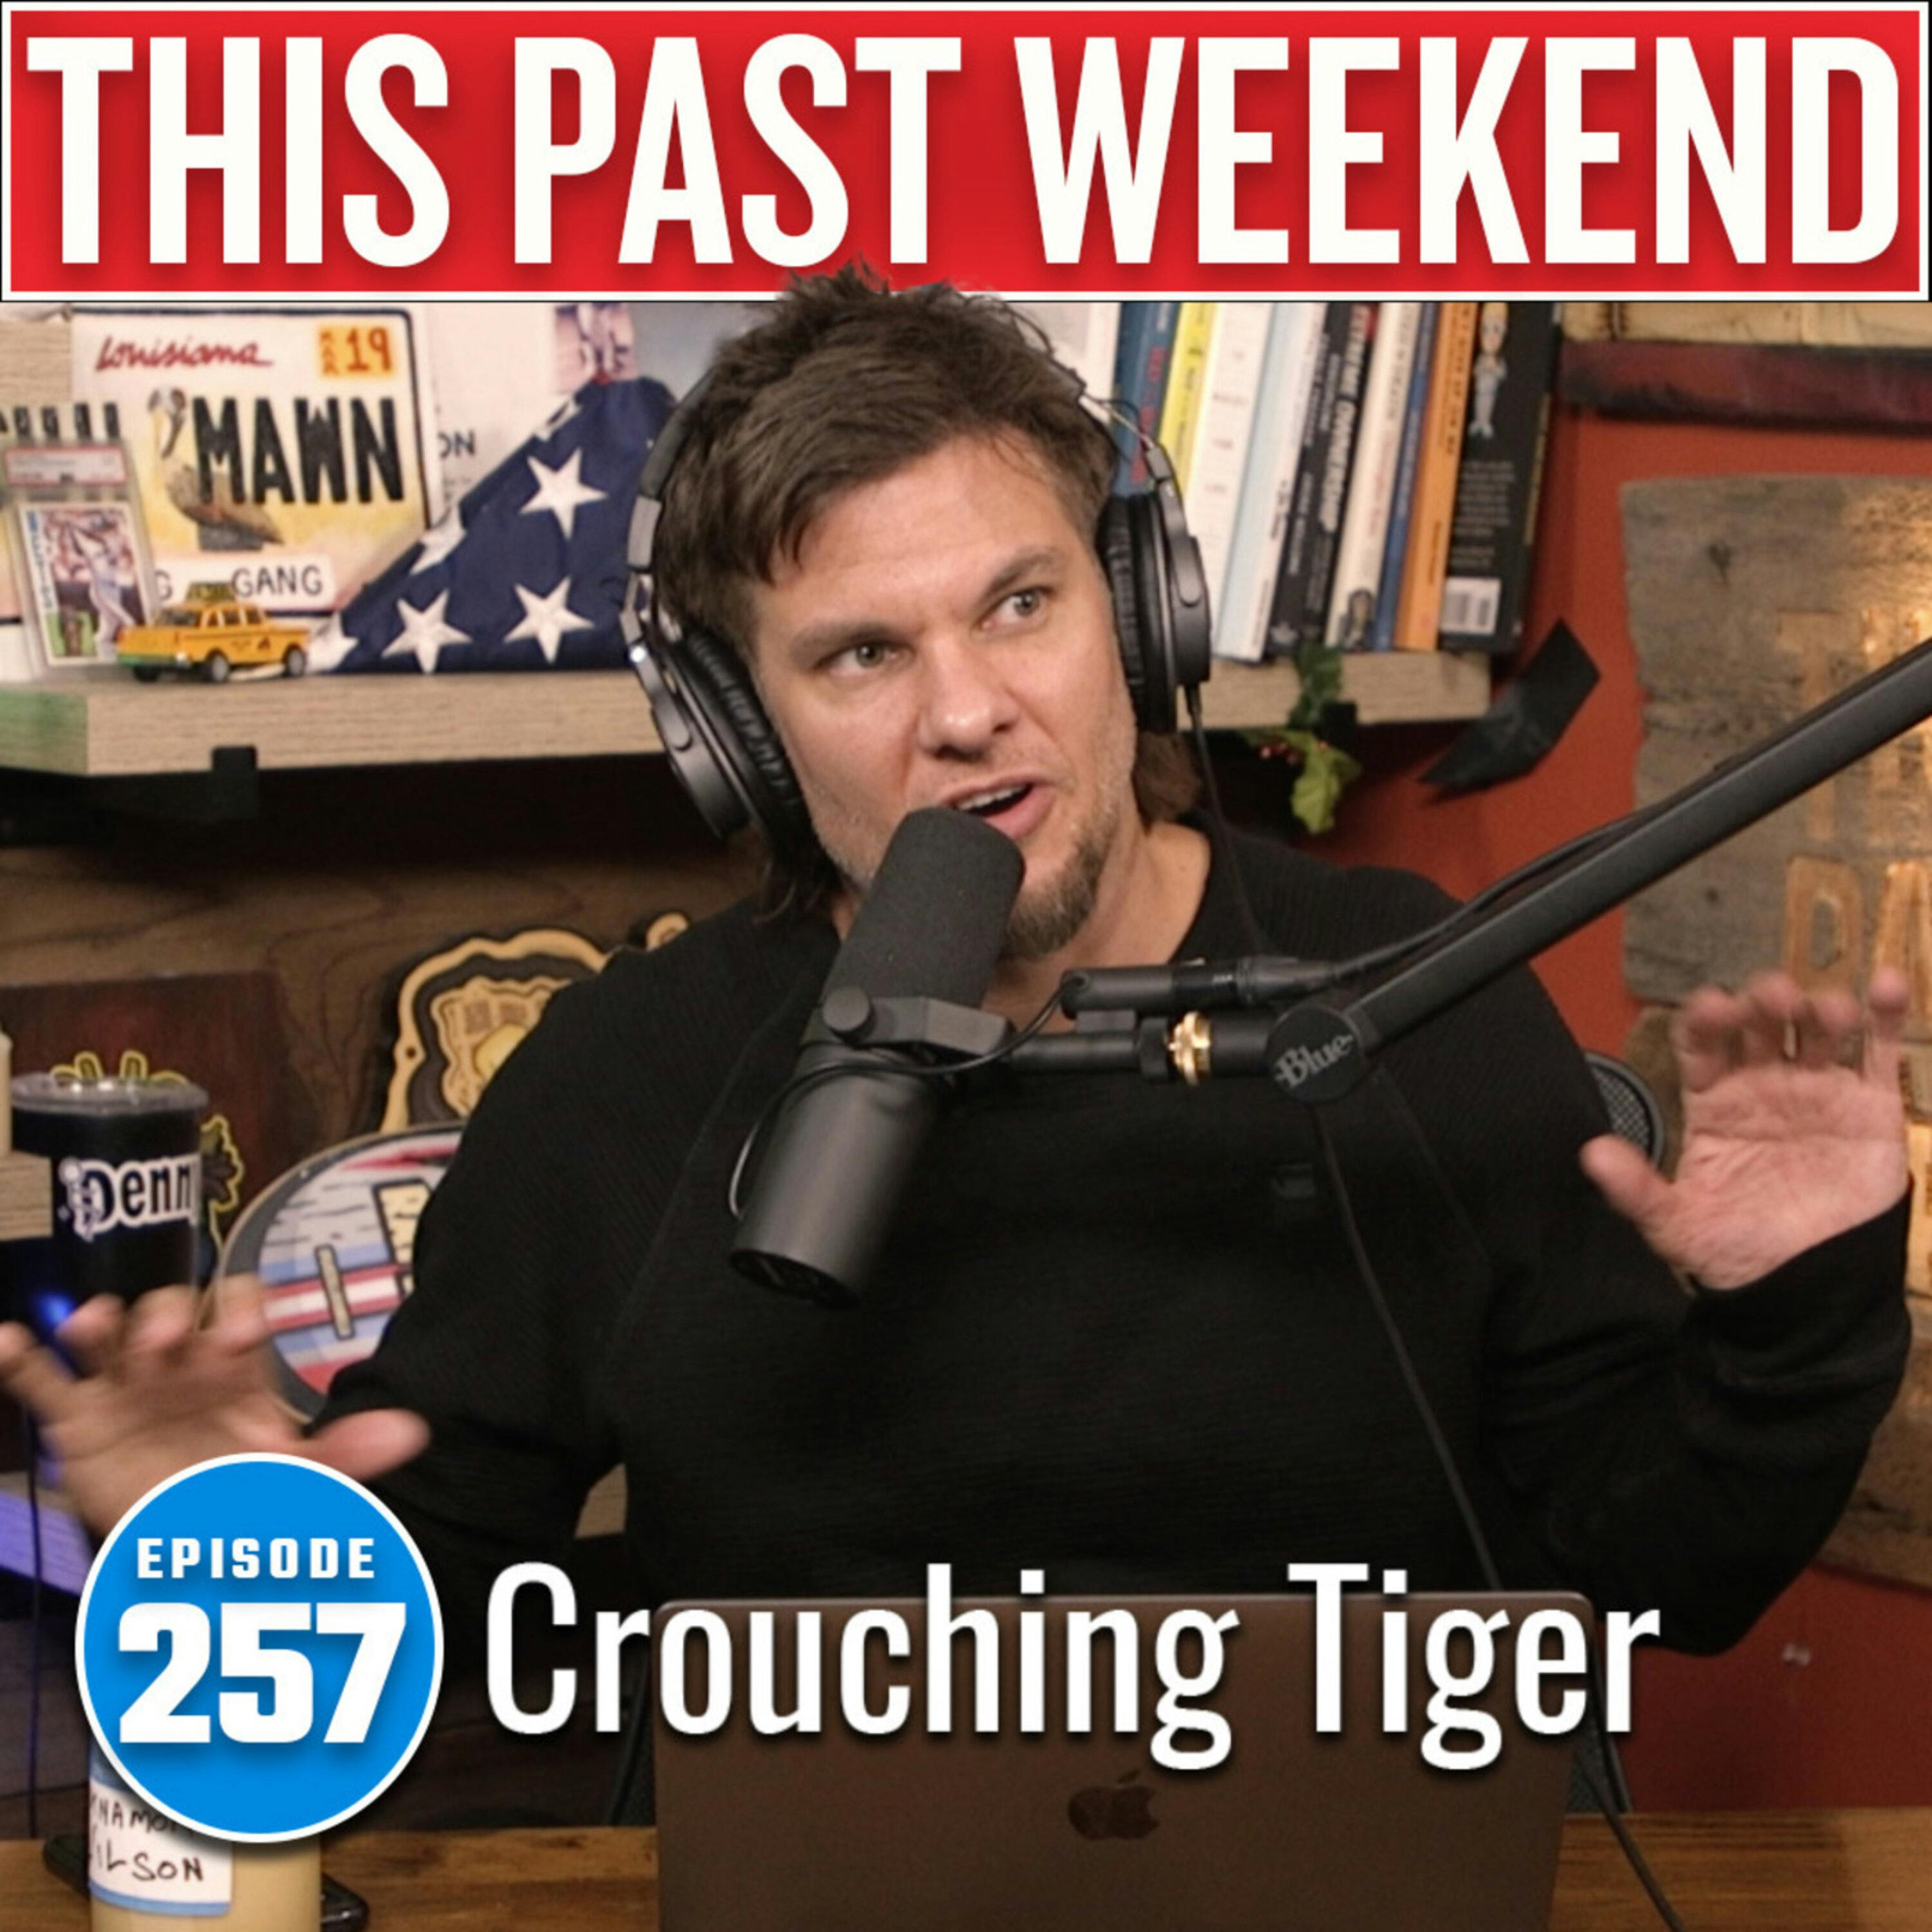 Crouching Tiger | This Past Weekend #257 by Theo Von